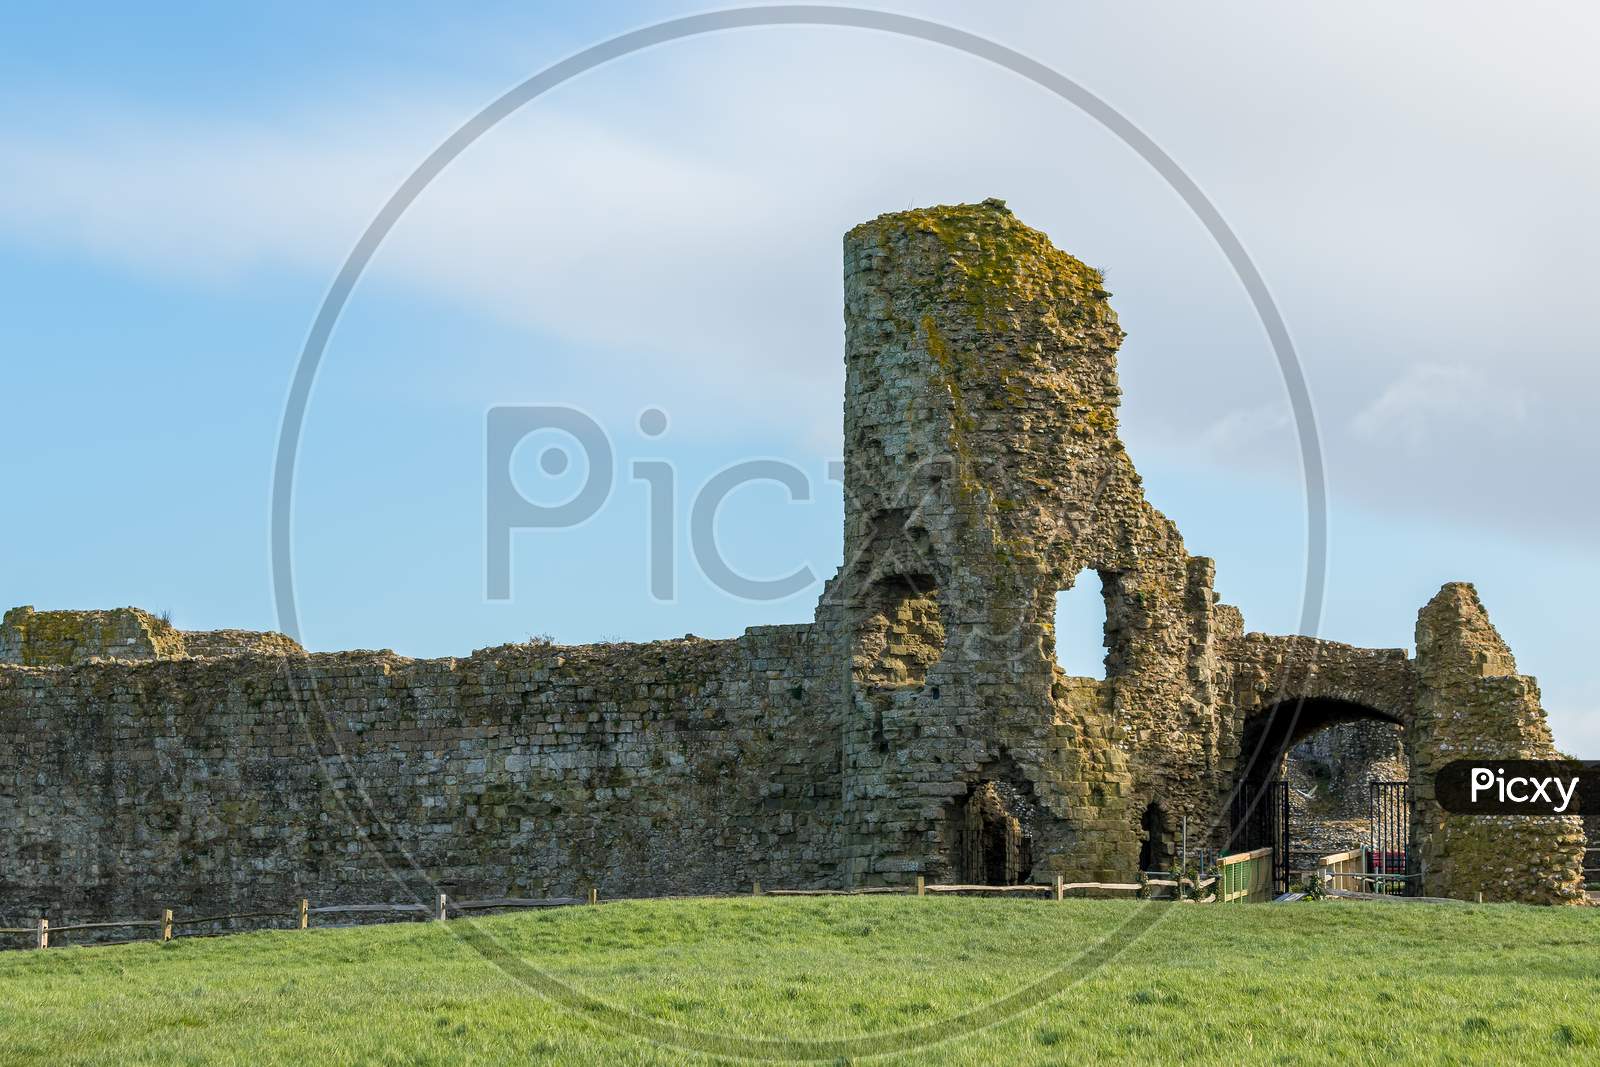 Pevensey, East Sussex/Uk - March 1 : Entrance To The Derelict Castle In Pevensey East Sussex On March 1, 2020